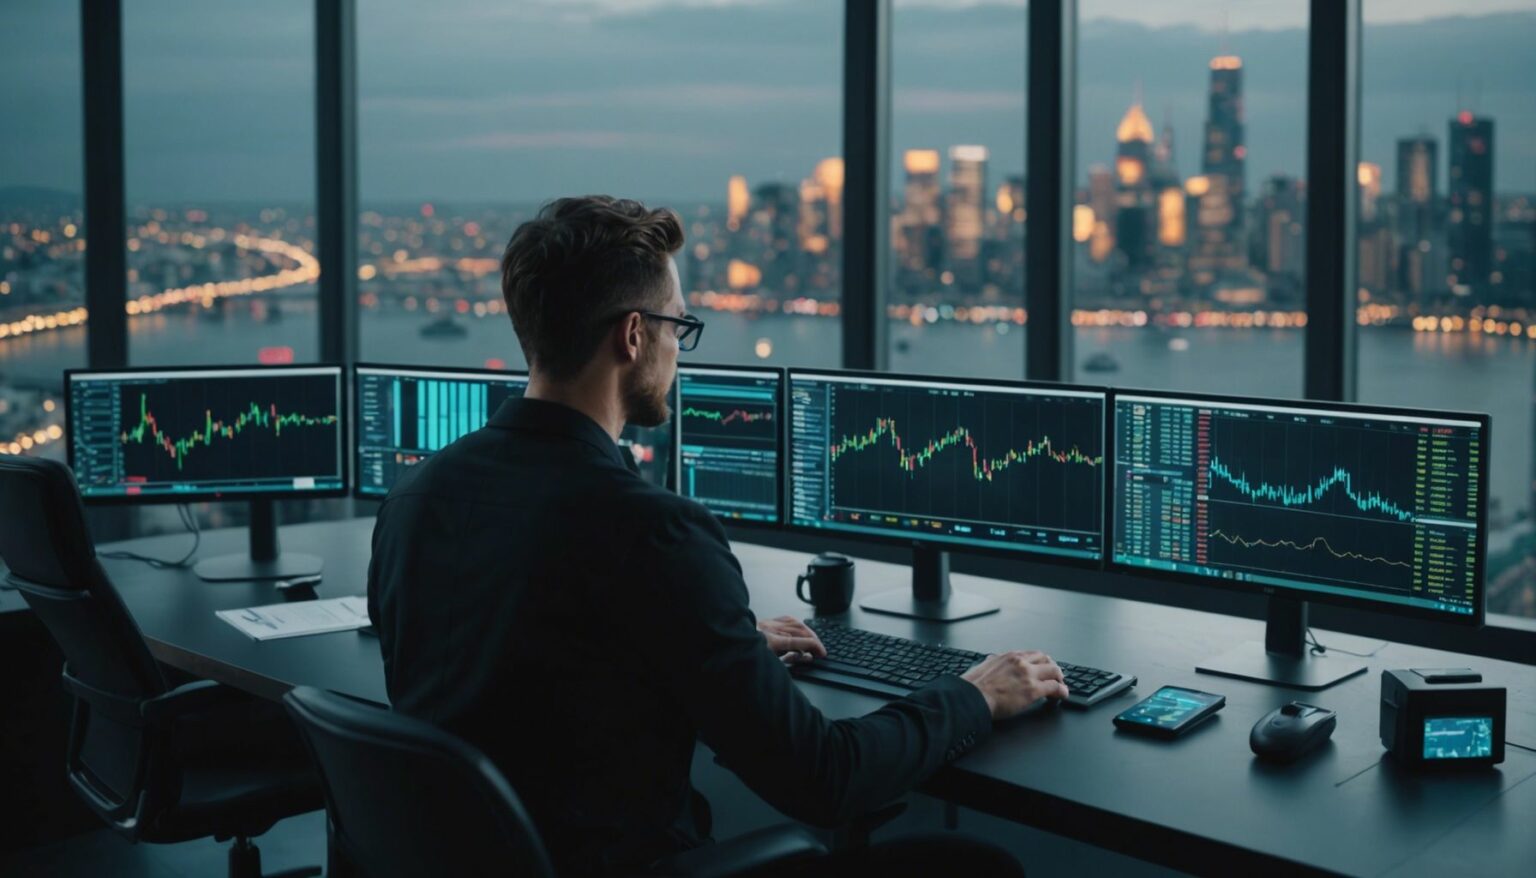 Trader analyzing cryptocurrency market charts on multiple screens with a futuristic cityscape in the background.